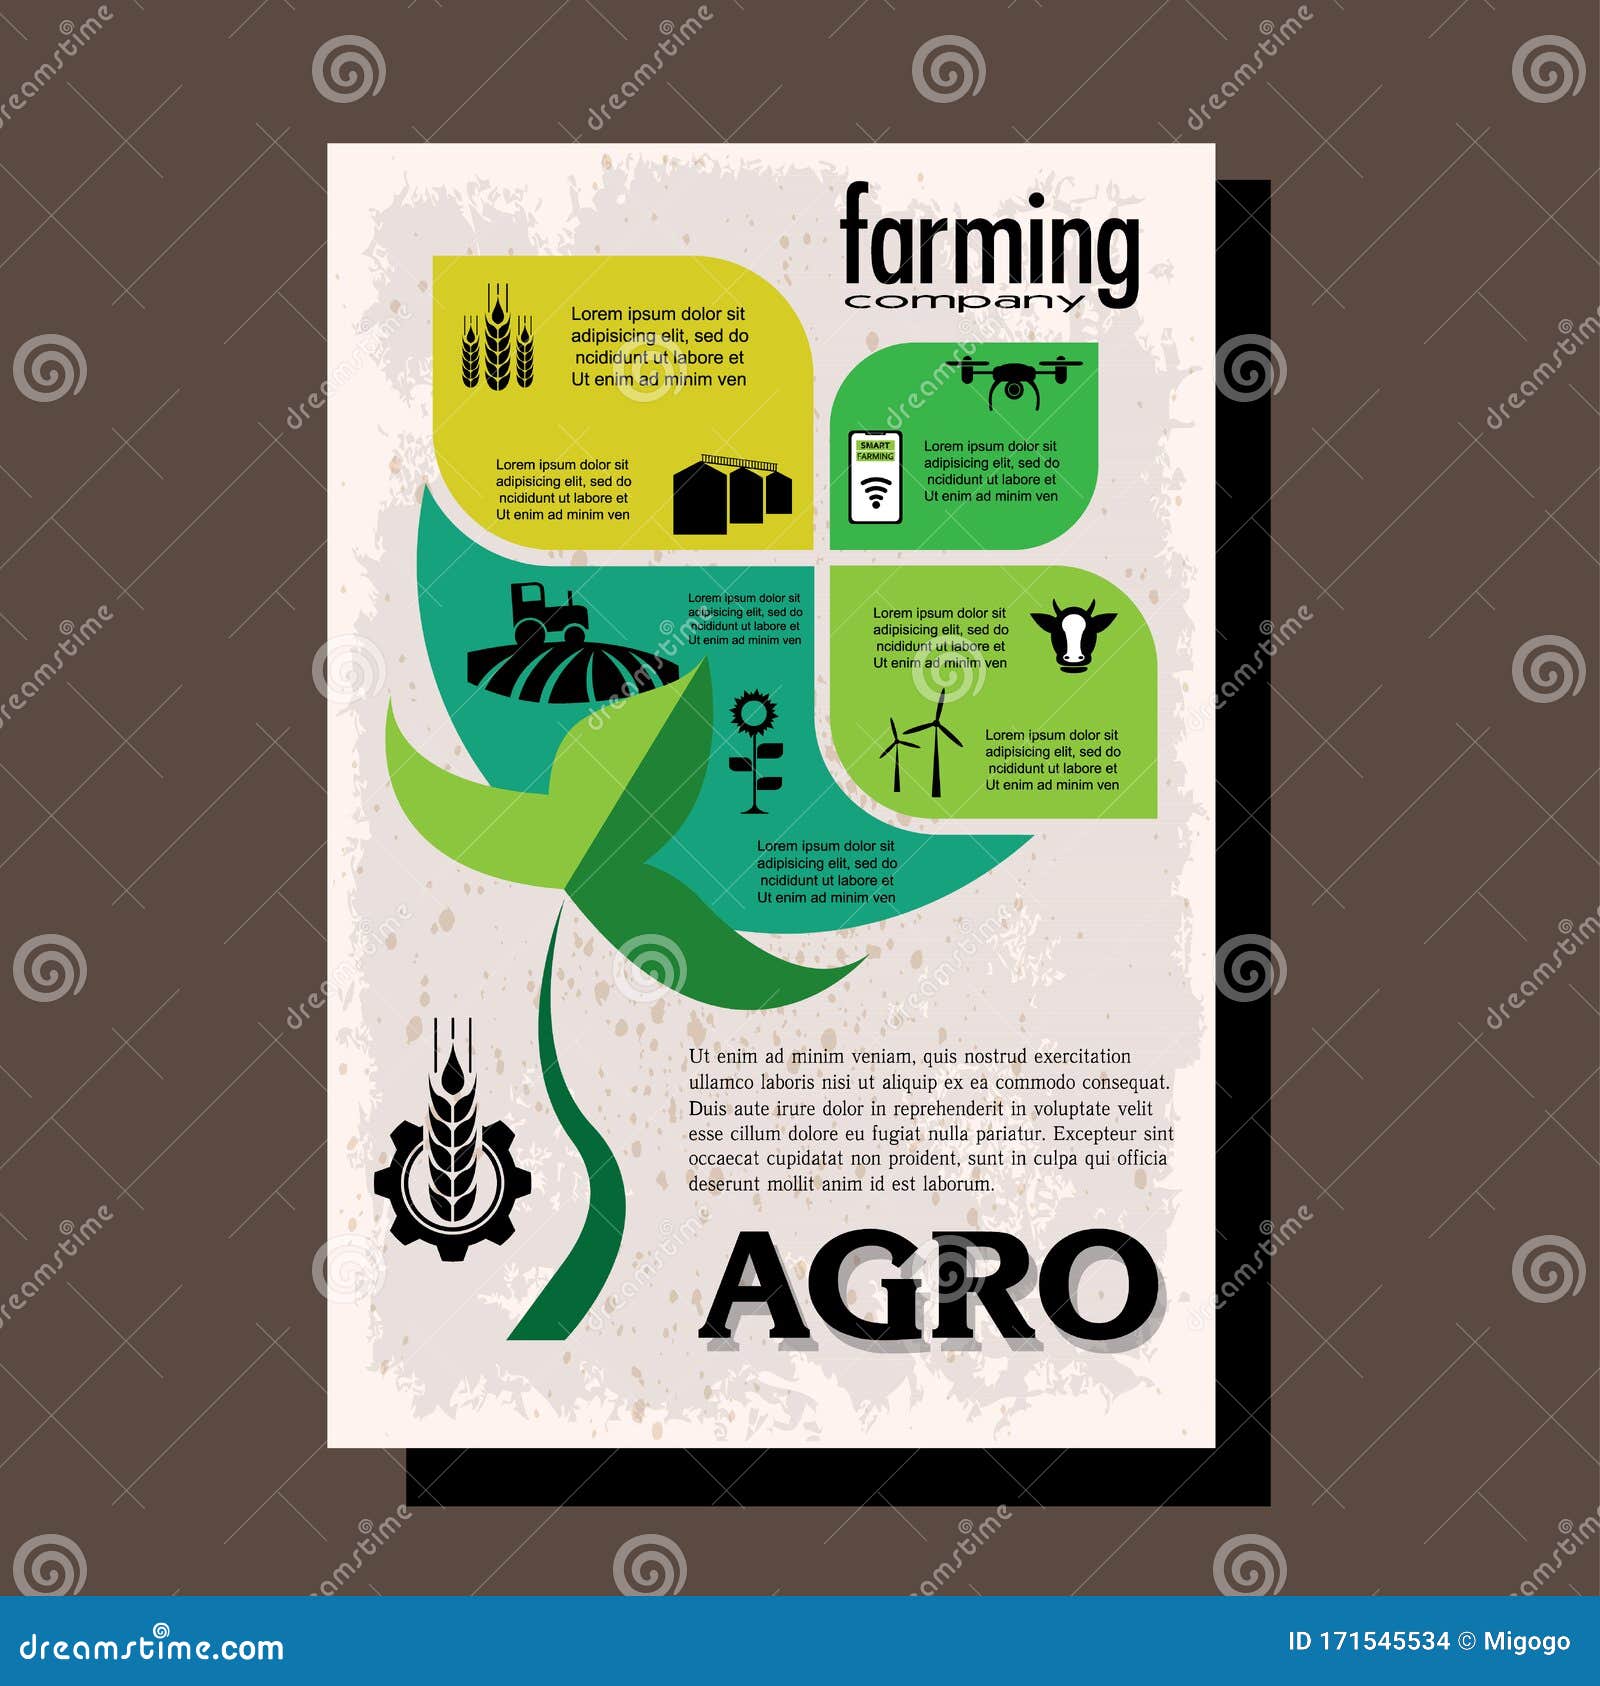 agriculture brochure  template for agricultural company, agro conference, forum, event, exhibition, business